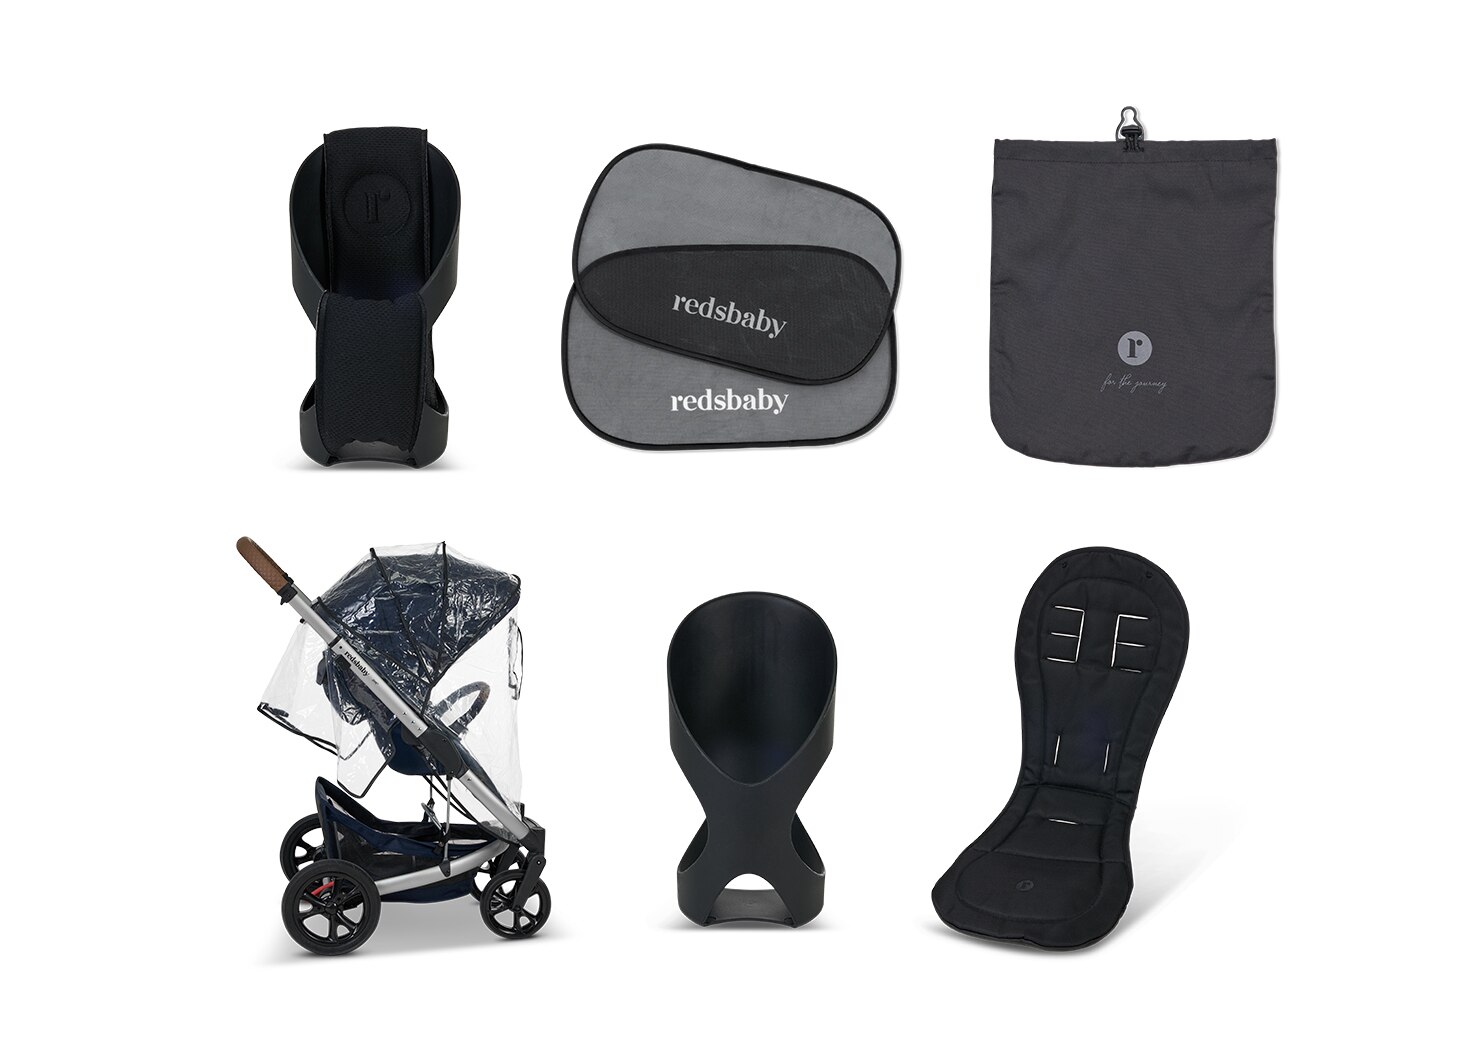 Save 81% OFF on Pram accessory bundle now $29.95(was $161.70)